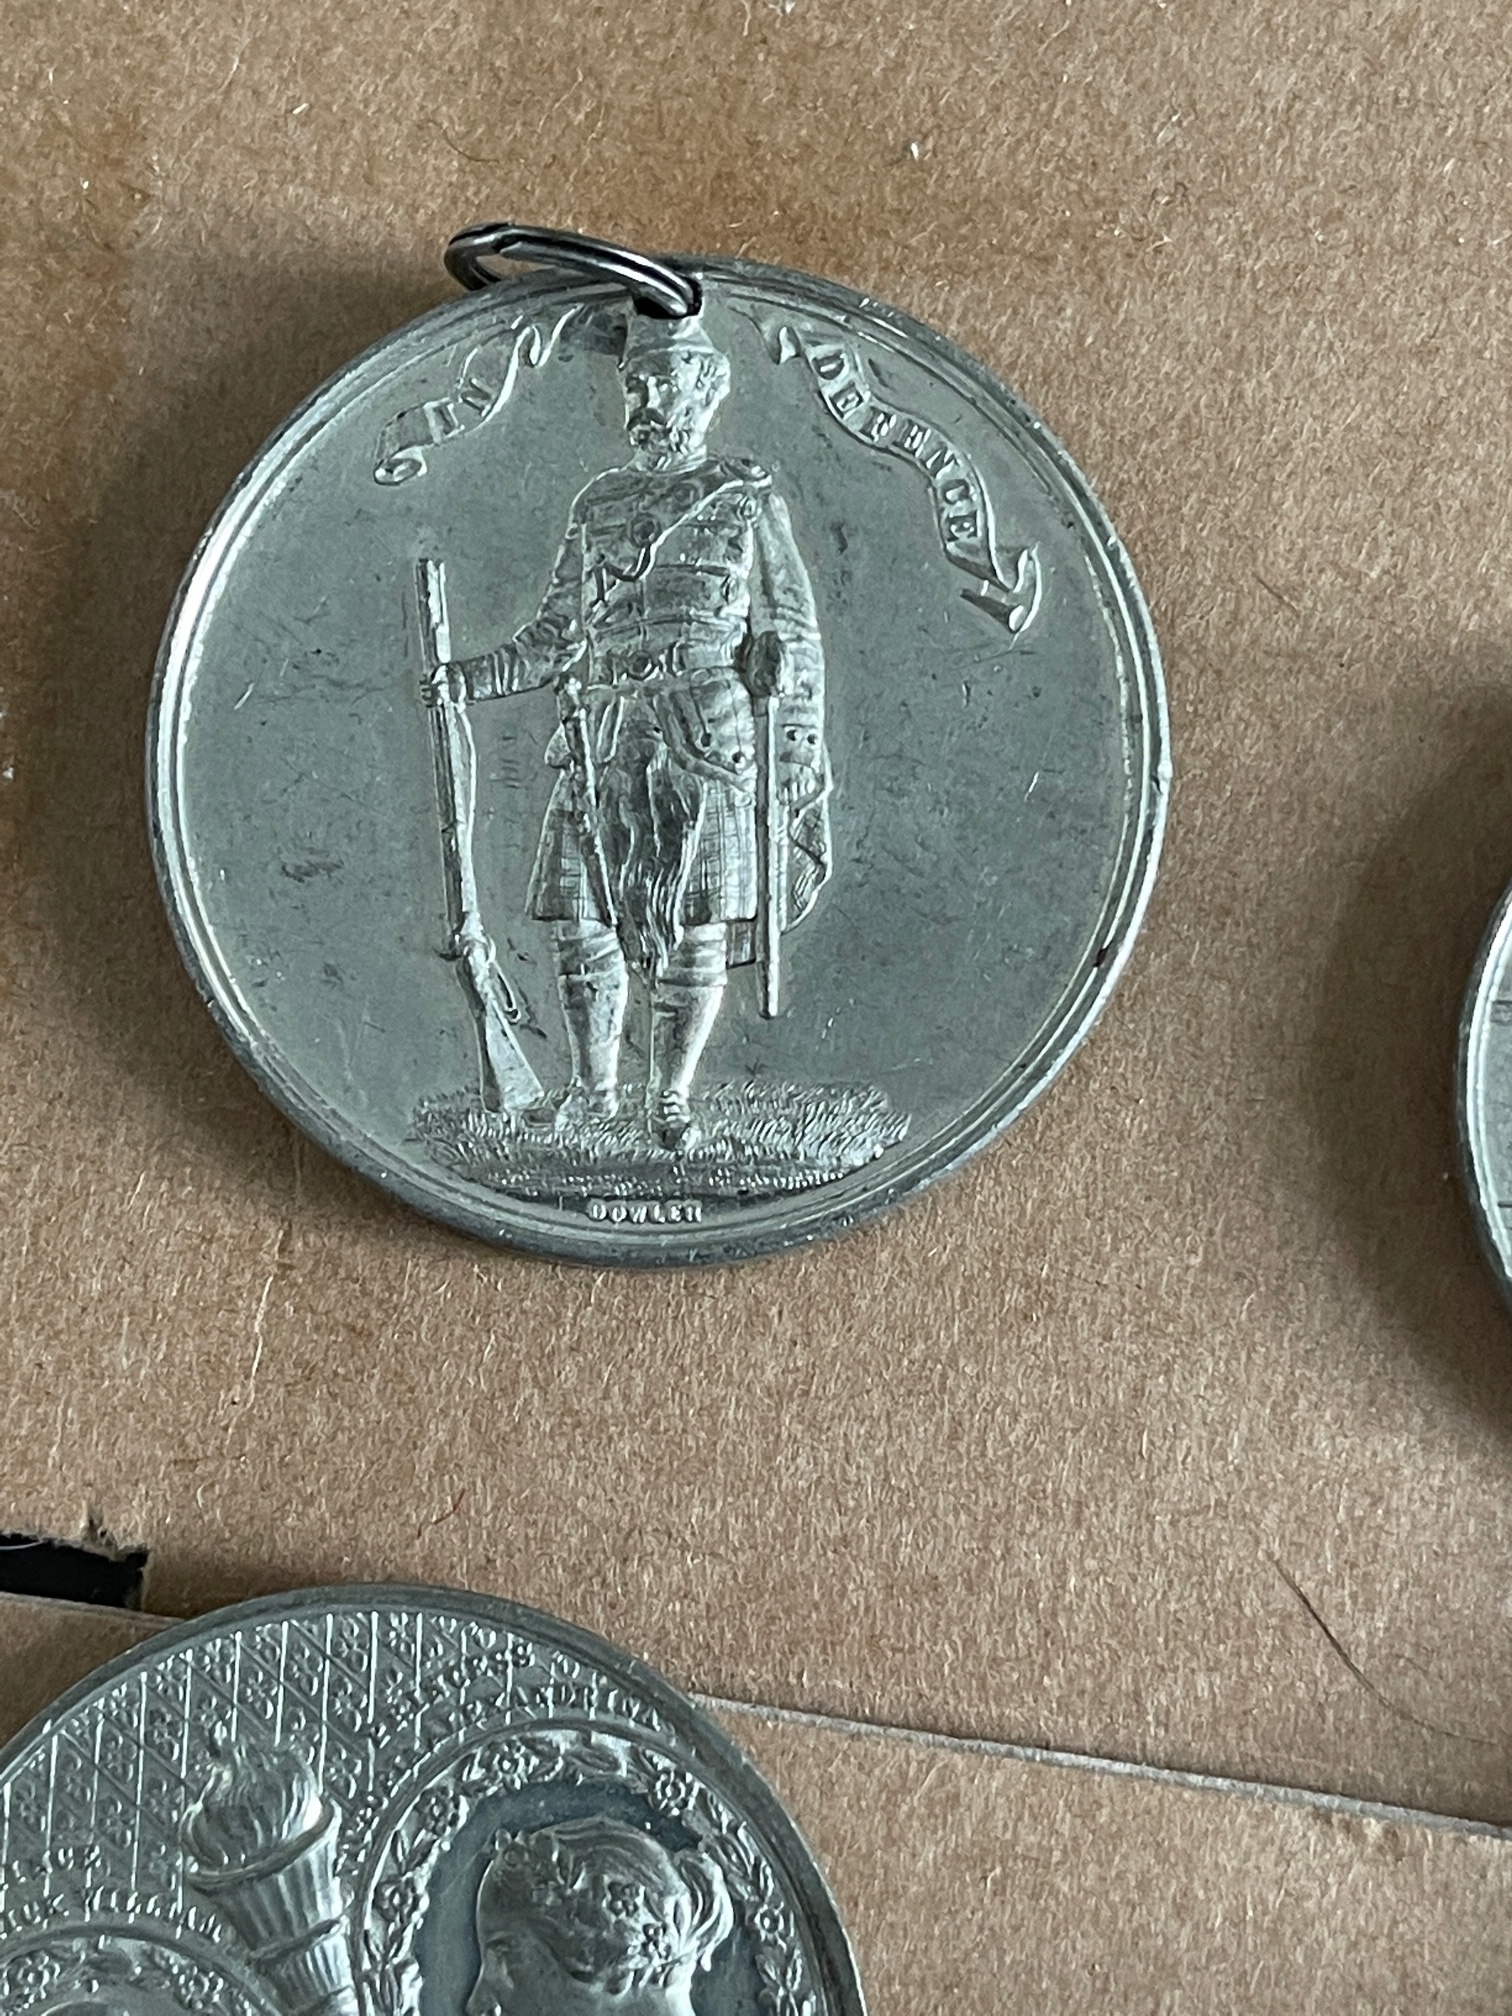 Lot of Various Antique/Vintage White Metal Medals including Lochaber Aliminium 1929 example. - Image 4 of 8